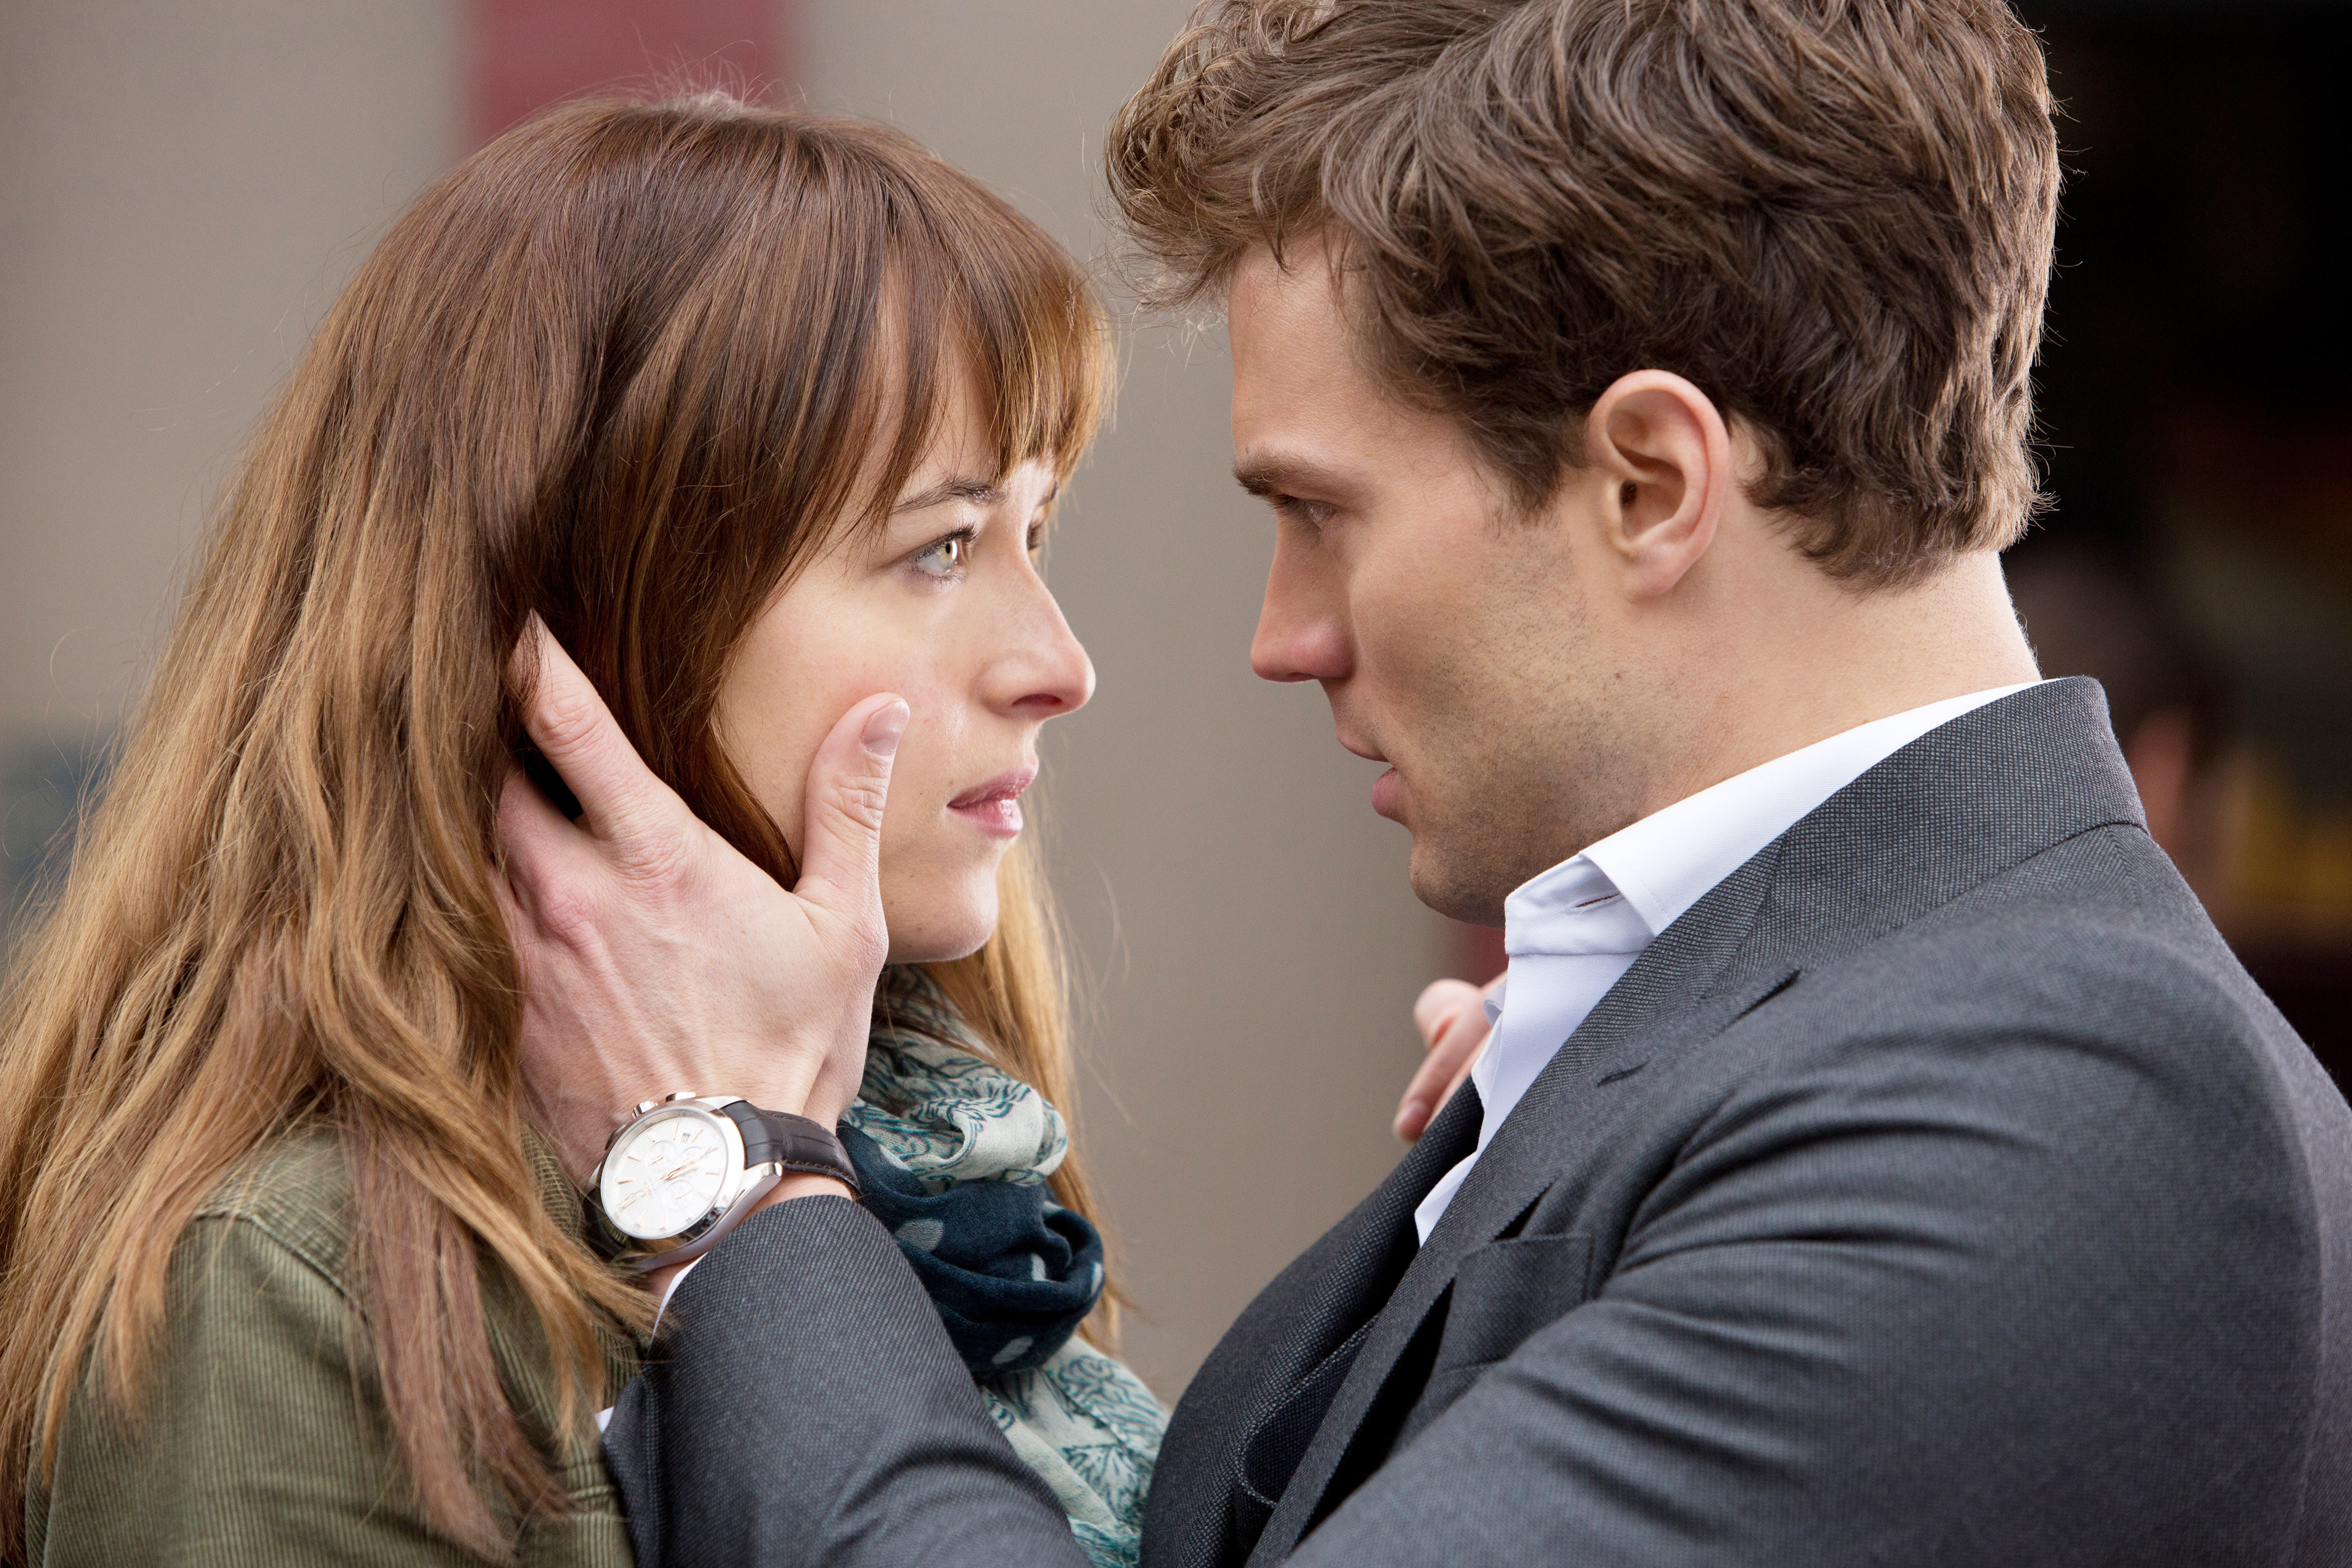 Fifty Shades of Grey (Chuck Zlotnick—Focus Features/courtesy Everett)